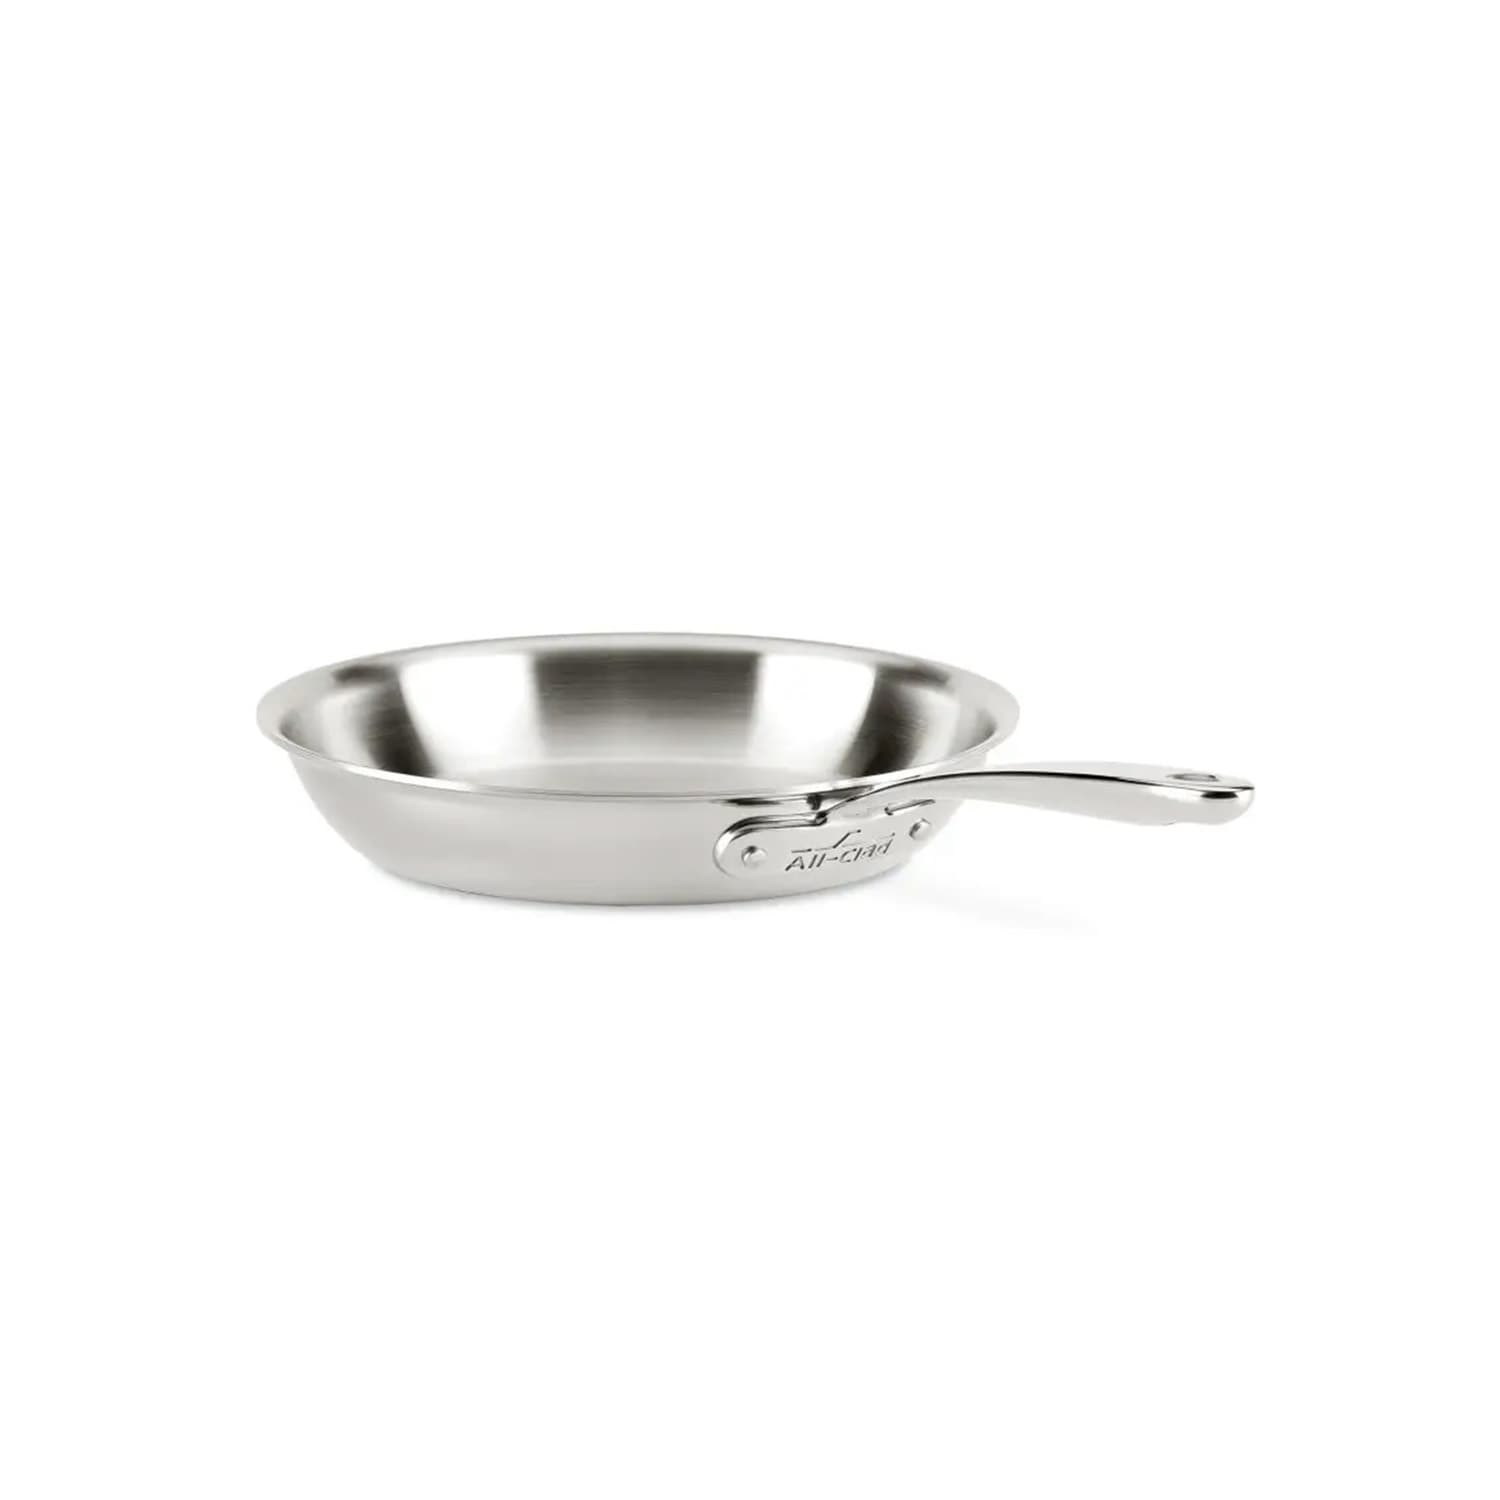 ID on All-Clad pots and pans? They don't look like ones on the